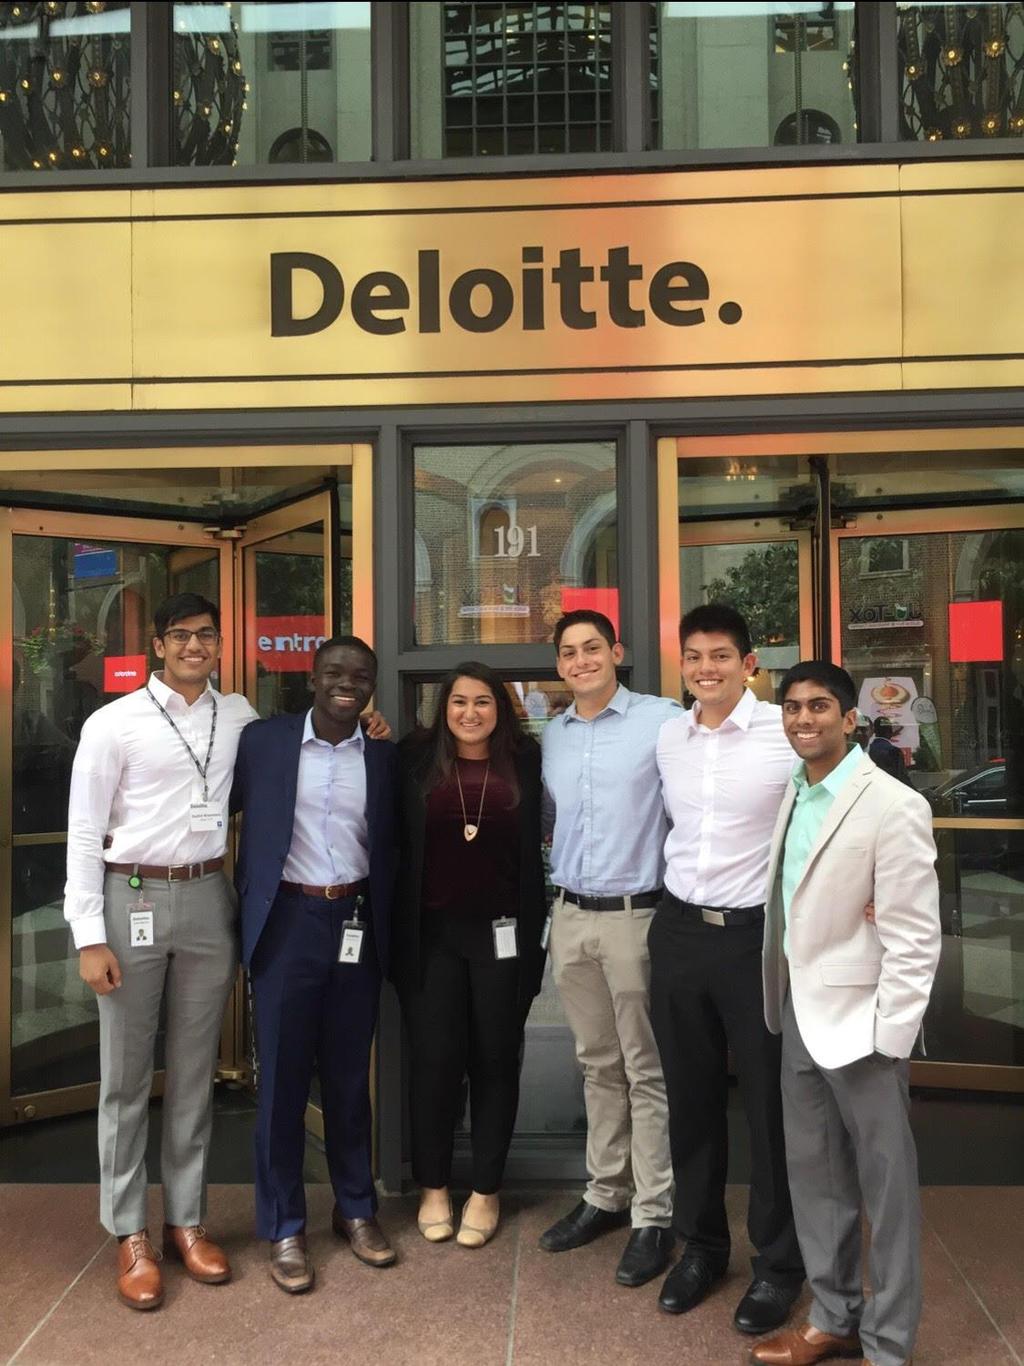 This summer I will be returning to the San Francisco office for Deloitte s sophomore program called the Discover Internship.